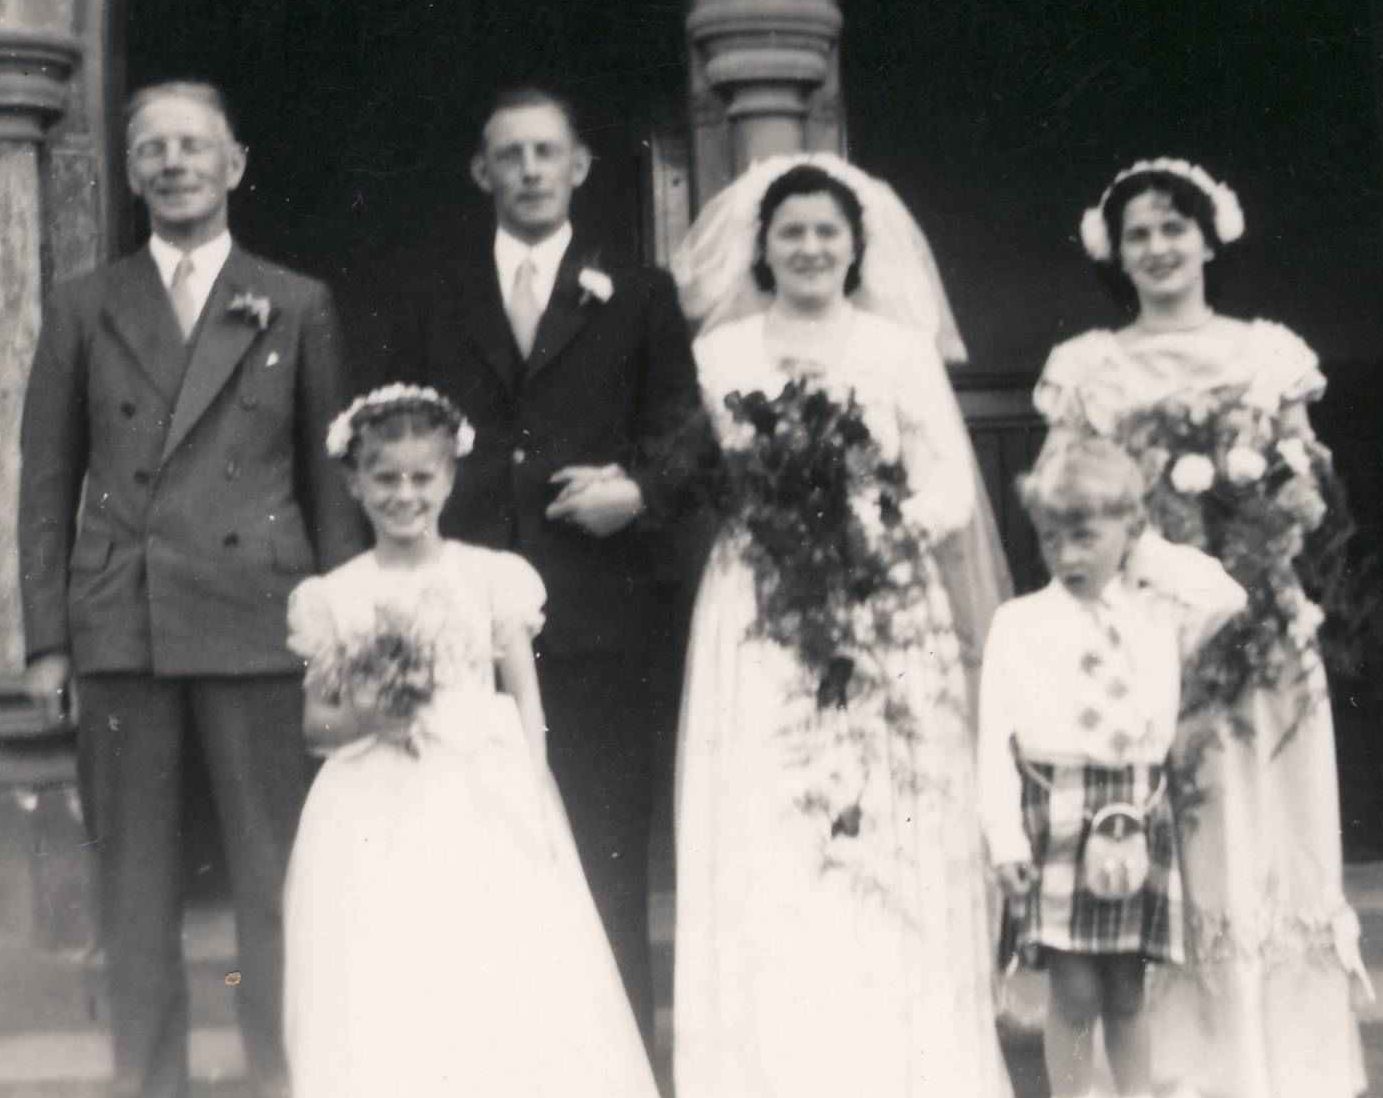 Florence Gilles' Wedding - c1945 - Cromarty Archive